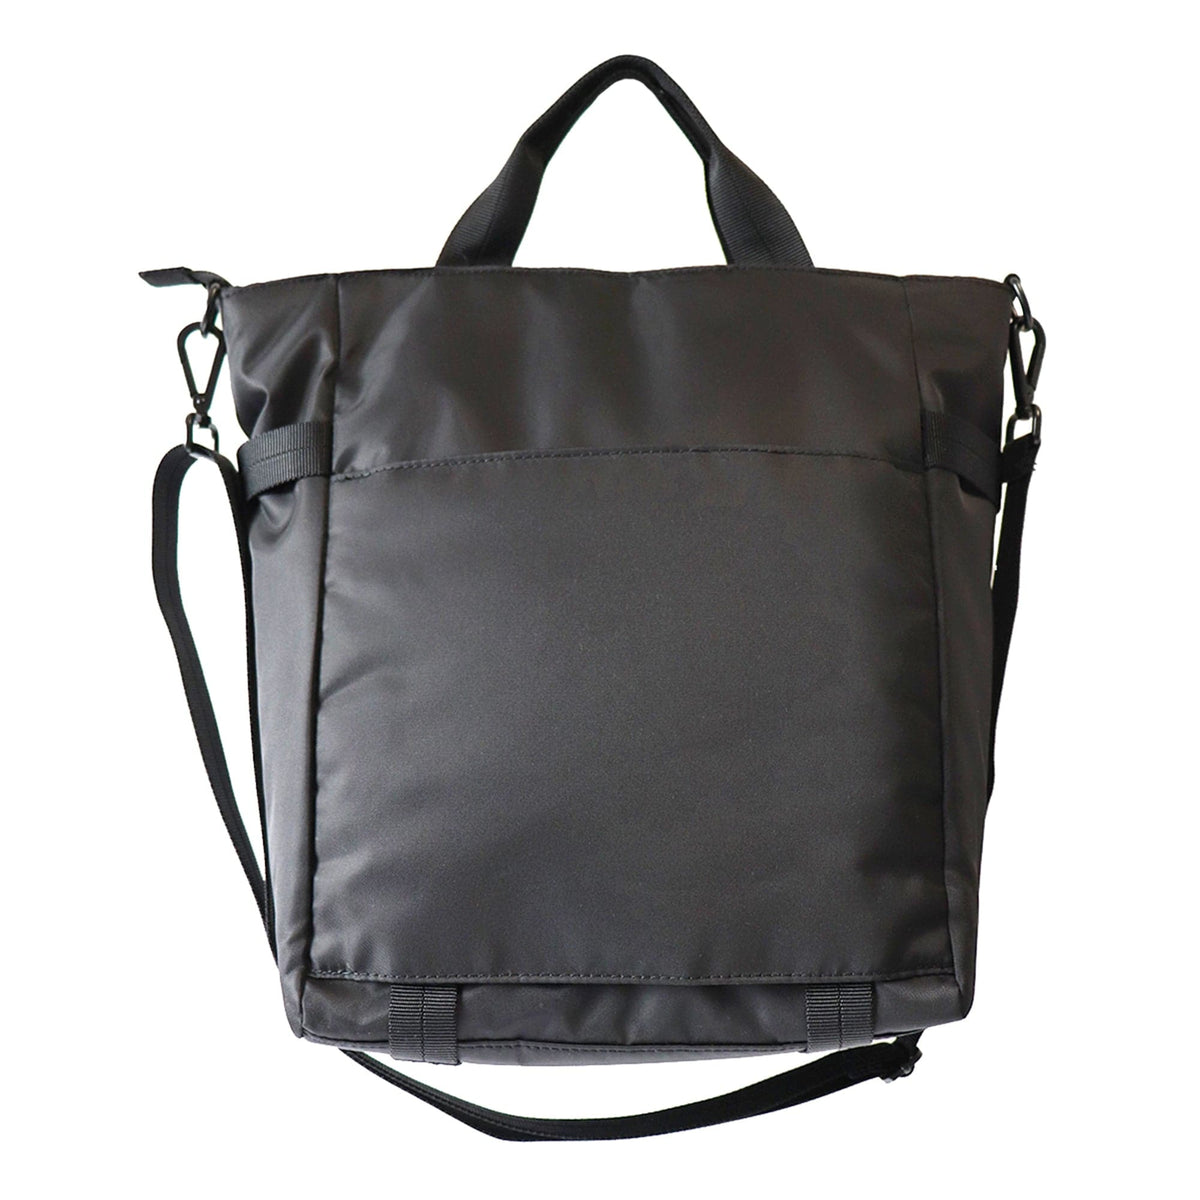 Hedgren Gracie Sustainably Made Tote Bag